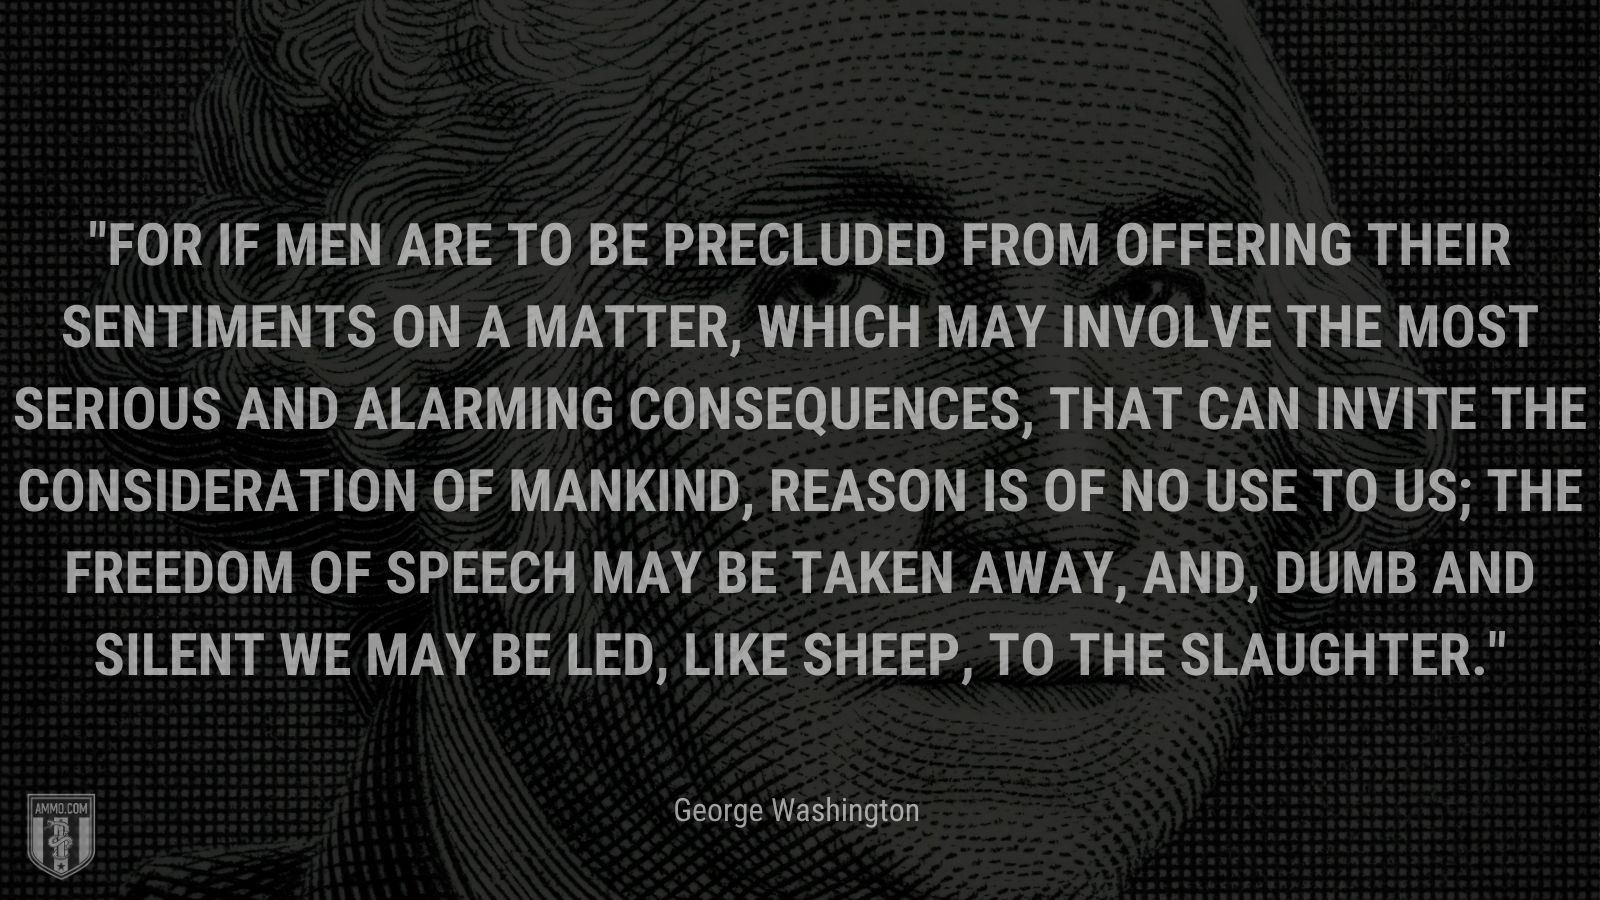 “For if Men are to be precluded from offering their Sentiments on a matter, which may involve the most serious and alarming consequences, that can invite the consideration of Mankind, reason is of no use to us; the freedom of Speech may be taken away, and, dumb and silent we may be led, like sheep, to the Slaughter.” - George Washington